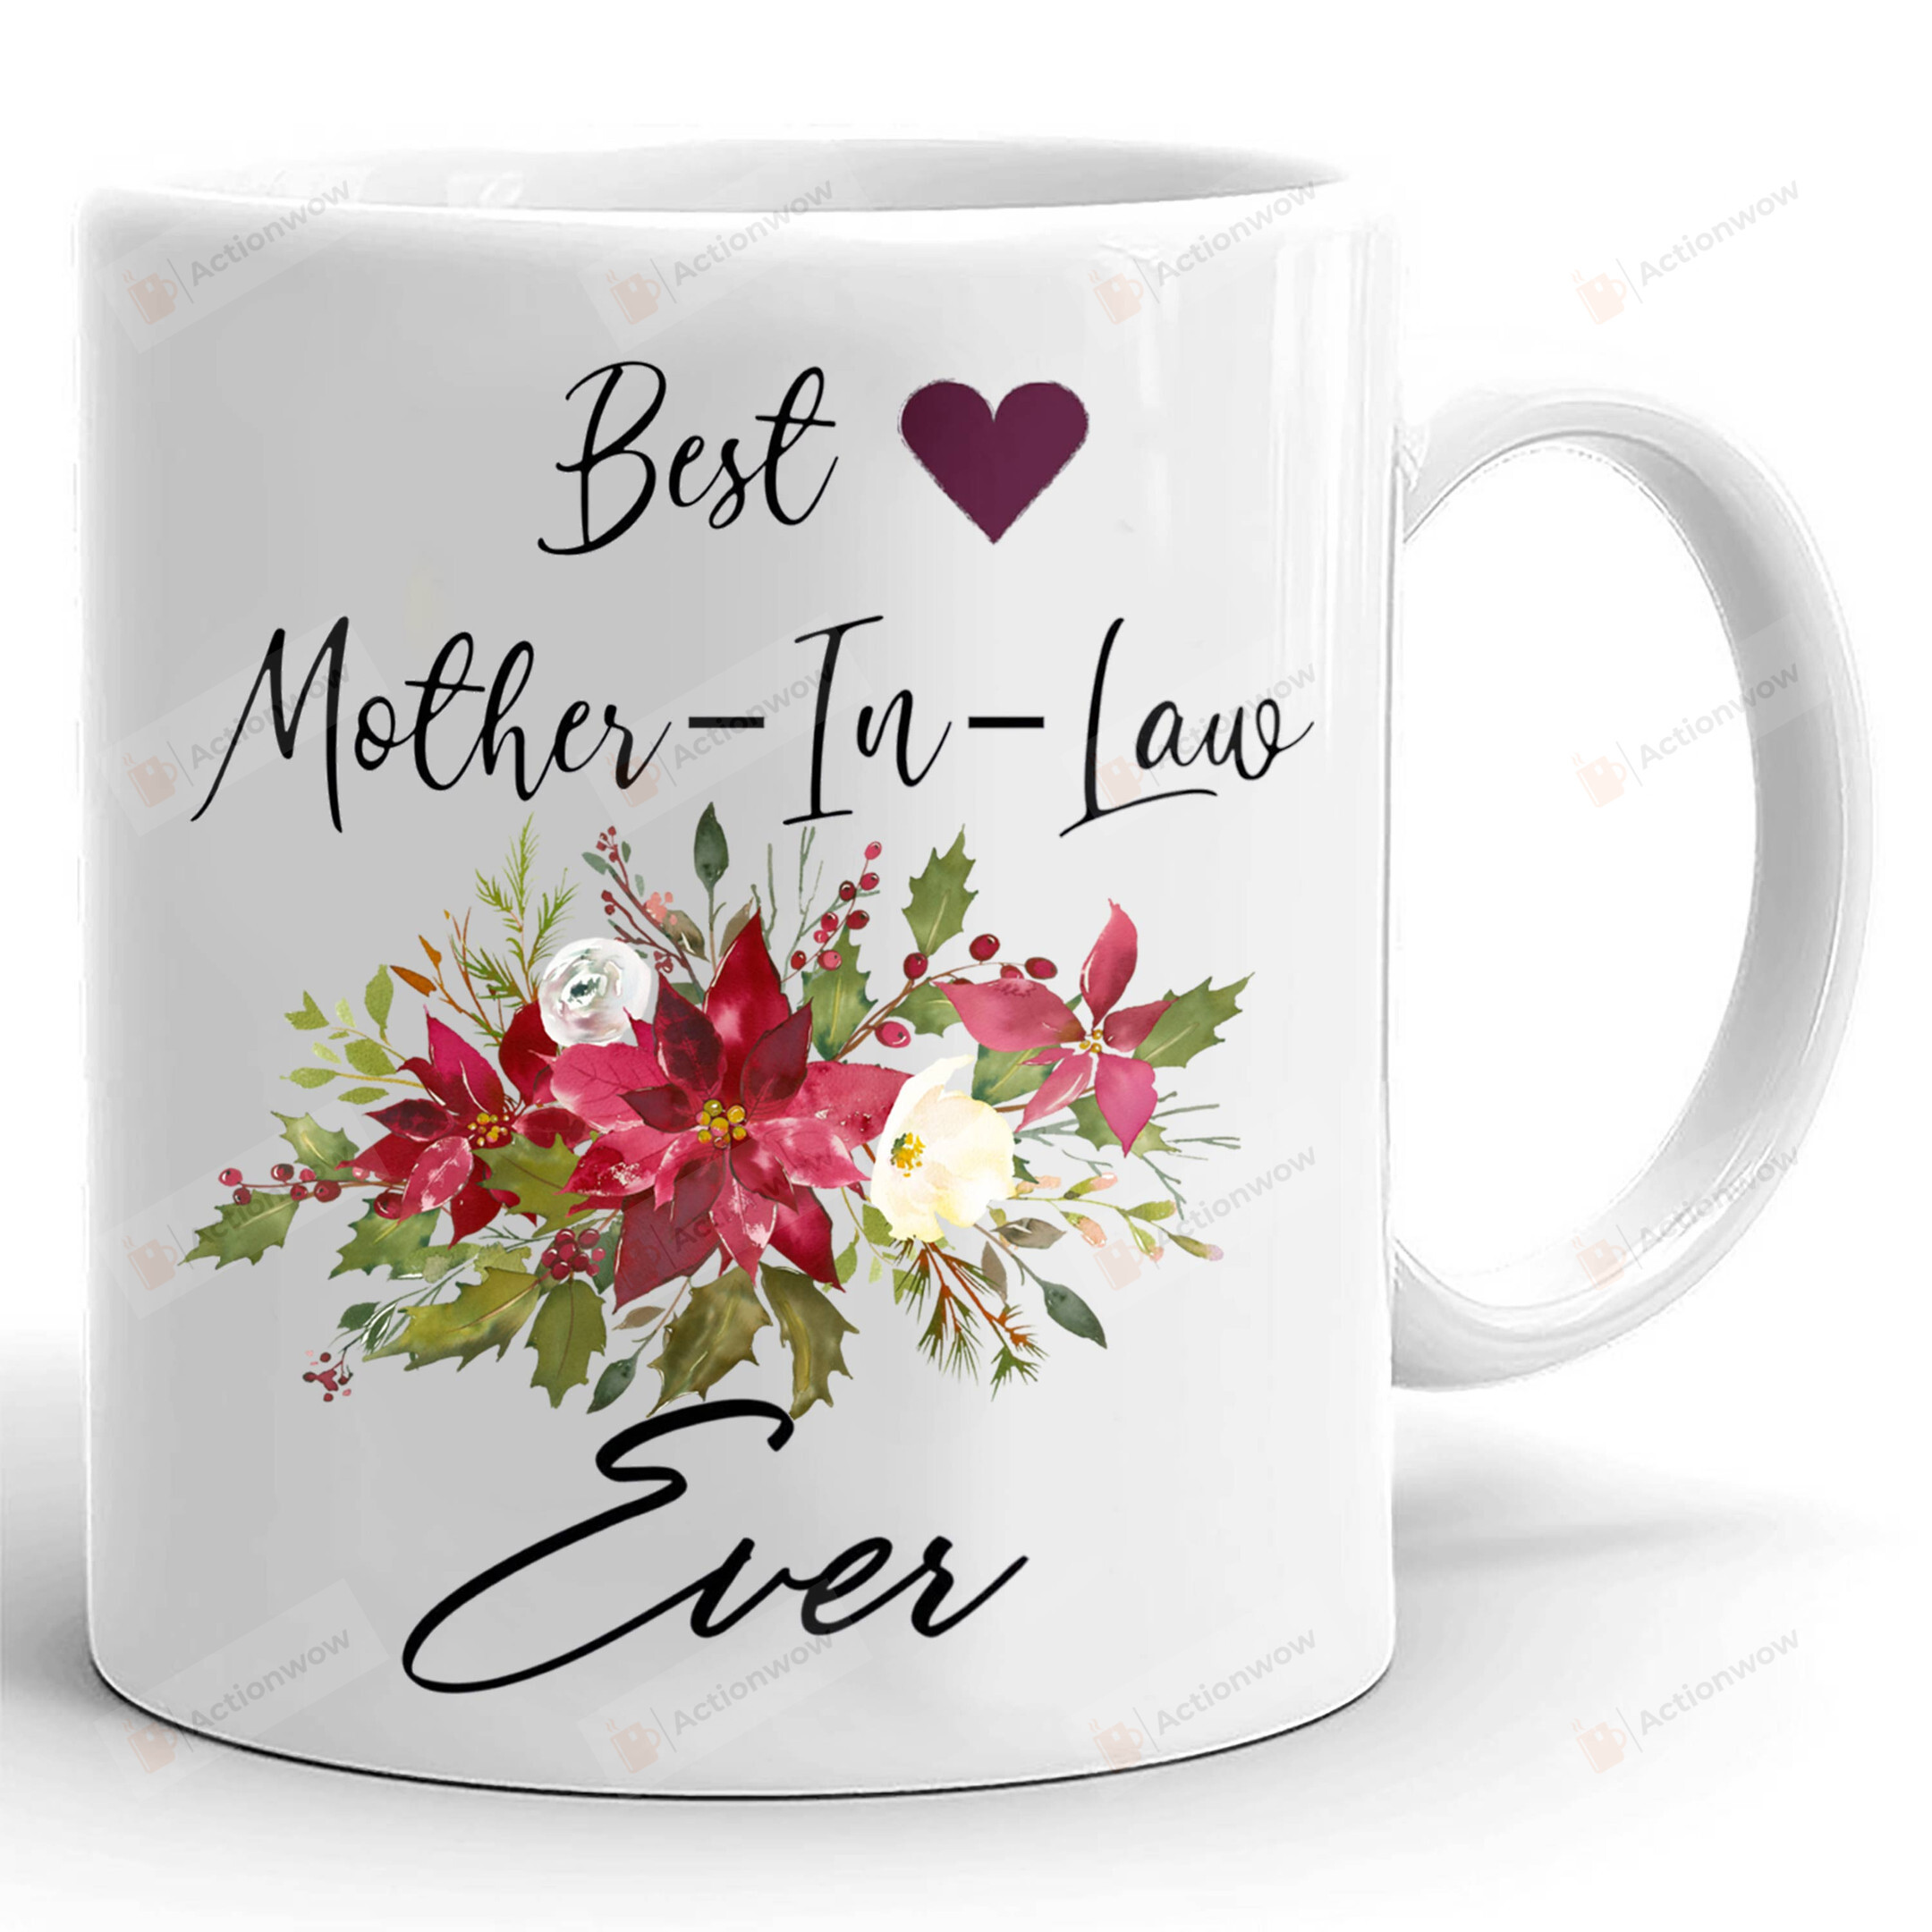 Best Mother In Law Ever Mug, Gifts For Mother In Law From Daughter In Law Son In Law